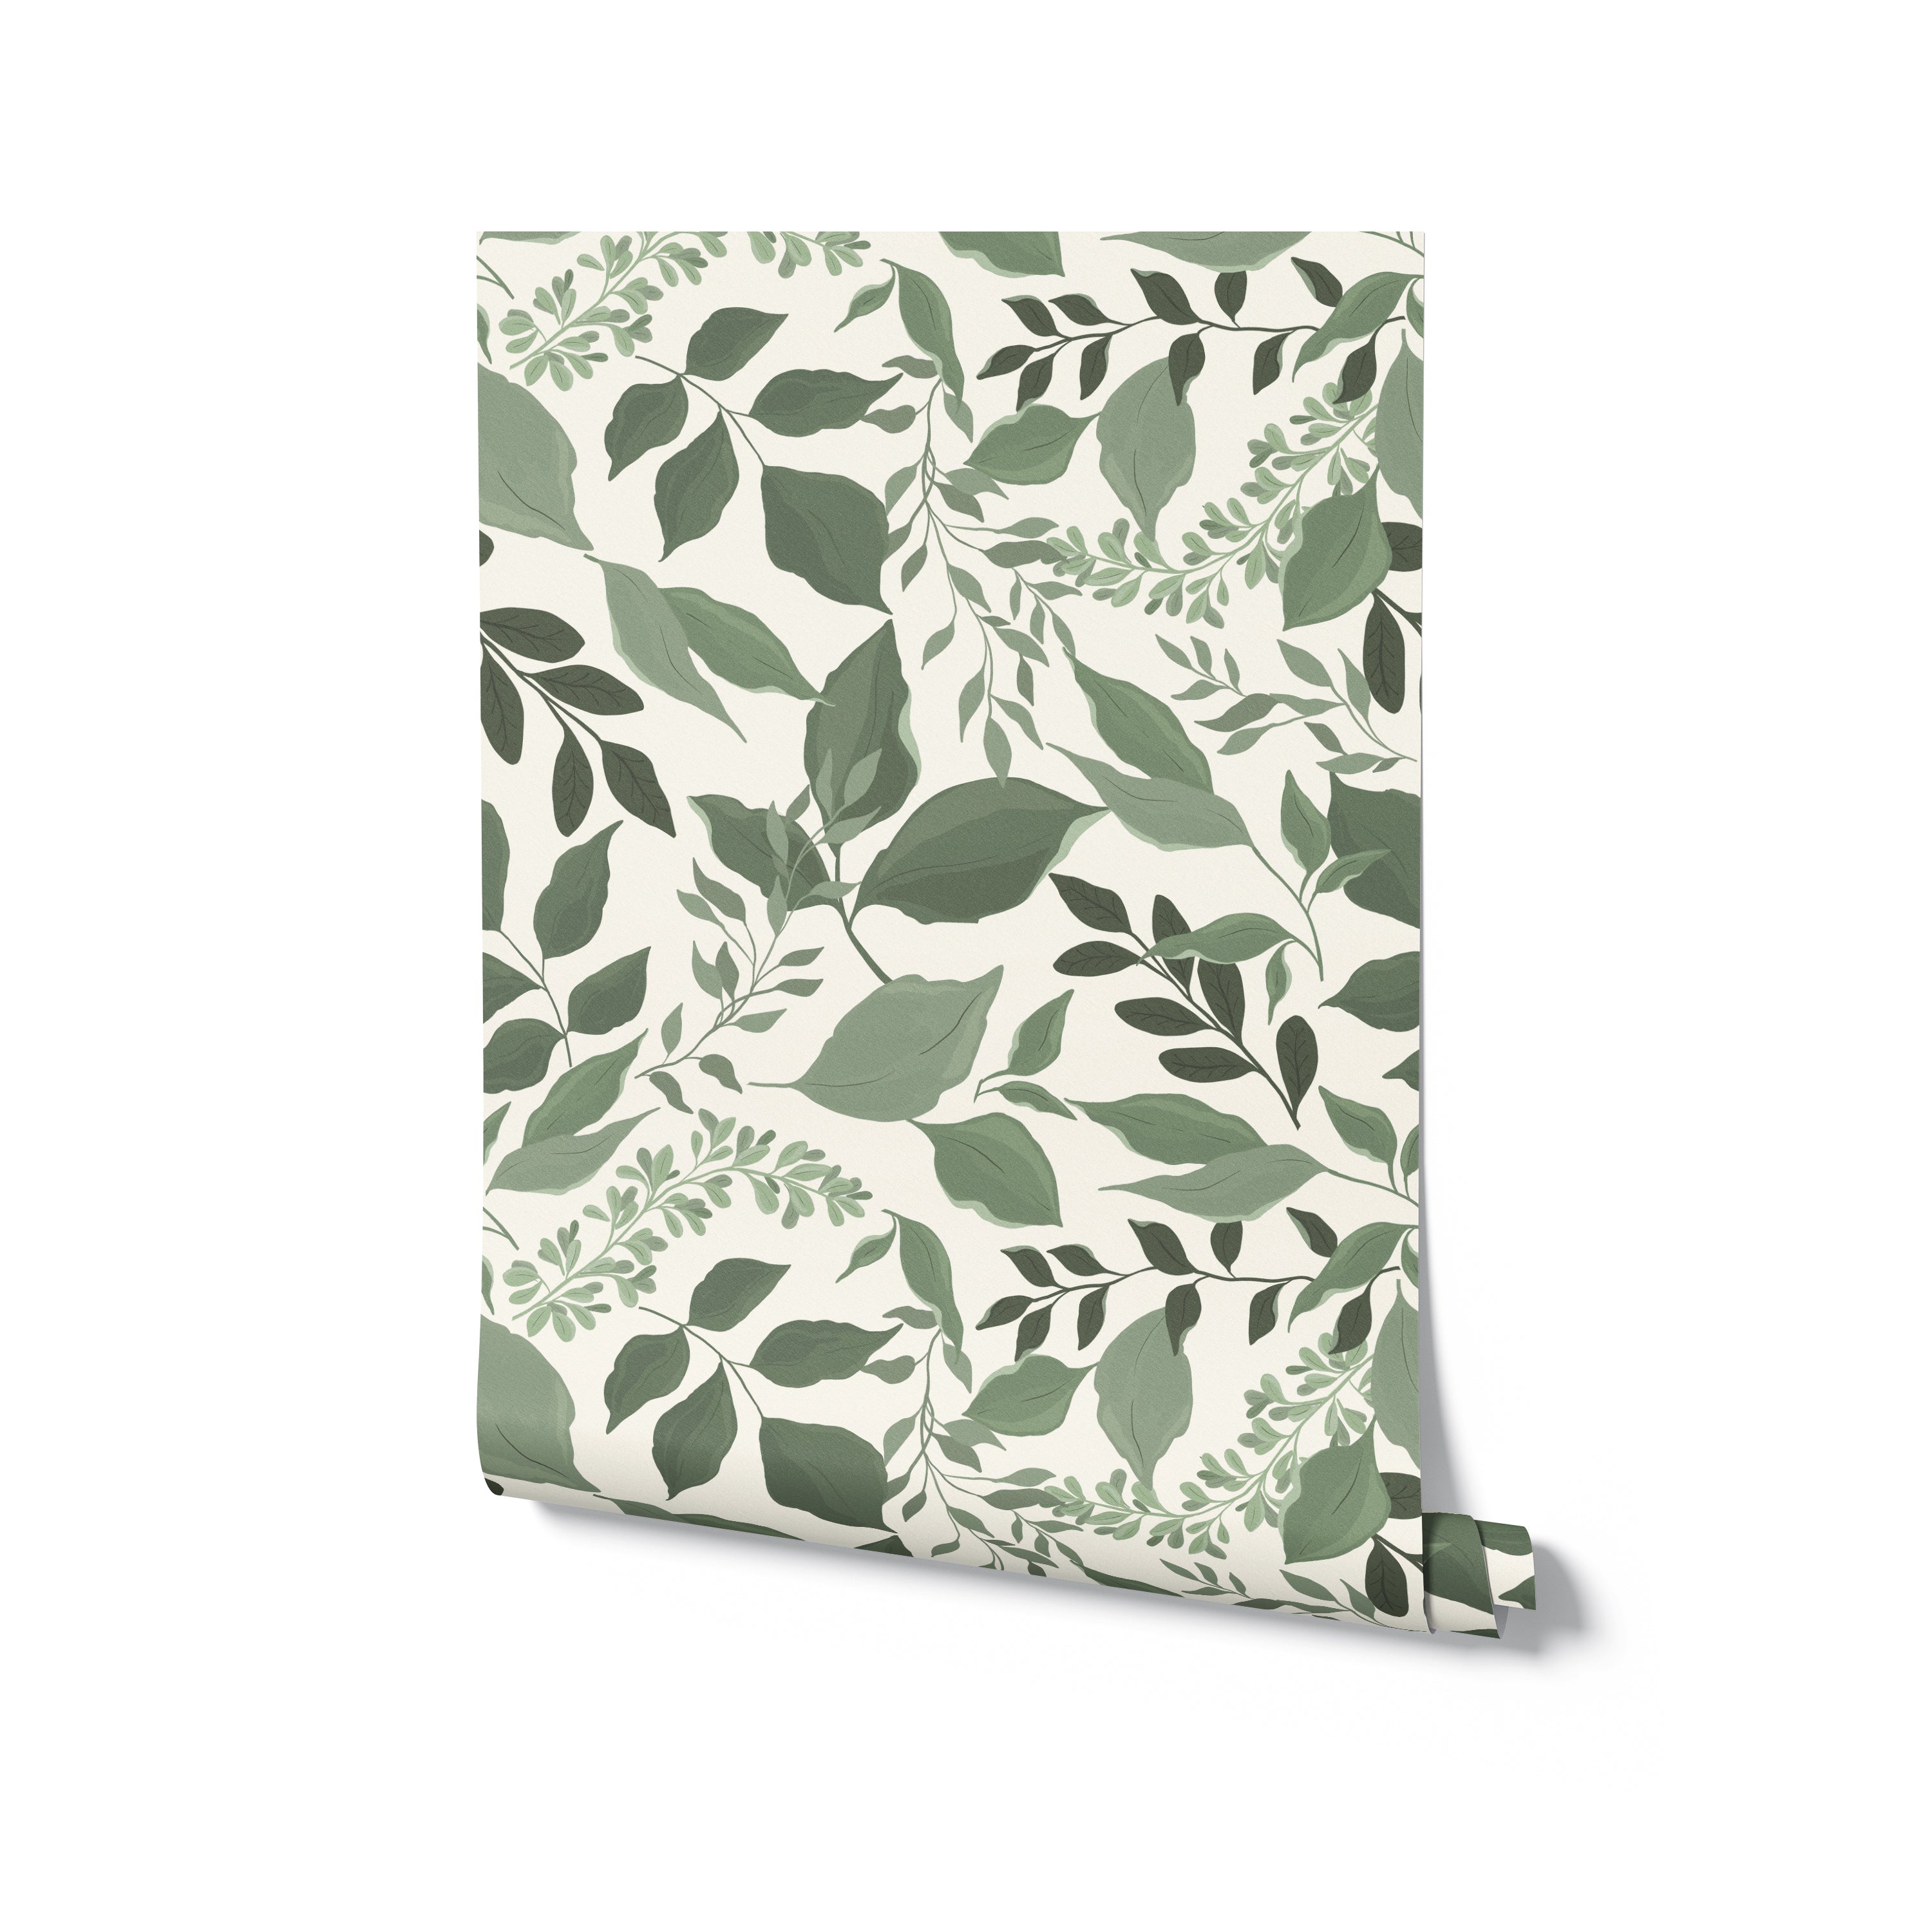  an image of the "Green Goddess Wallpaper" roll. The roll is partially unrolled against a white background to display the continuous leaf pattern. The wallpaper exhibits an array of green foliage designs, suggesting an organic and refreshing ambiance for any room.